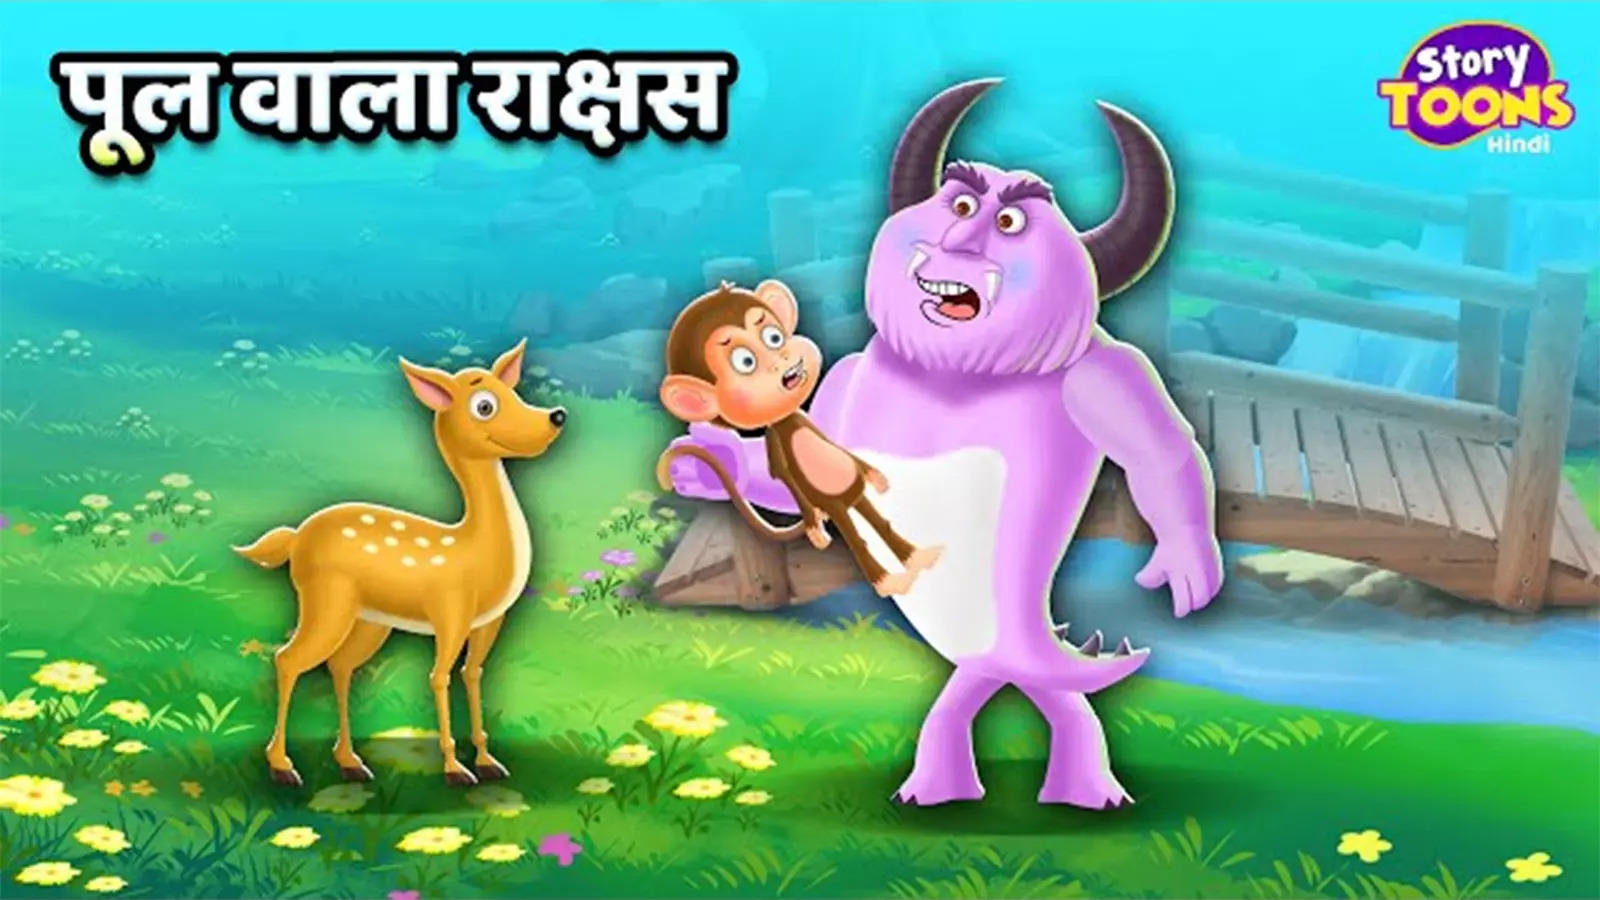 Watch Latest Children Hindi 'Deer And Demon Story' For Kids - Check Out  Kids Nursery Rhymes And Baby Songs In Hindi | Entertainment - Times of  India Videos